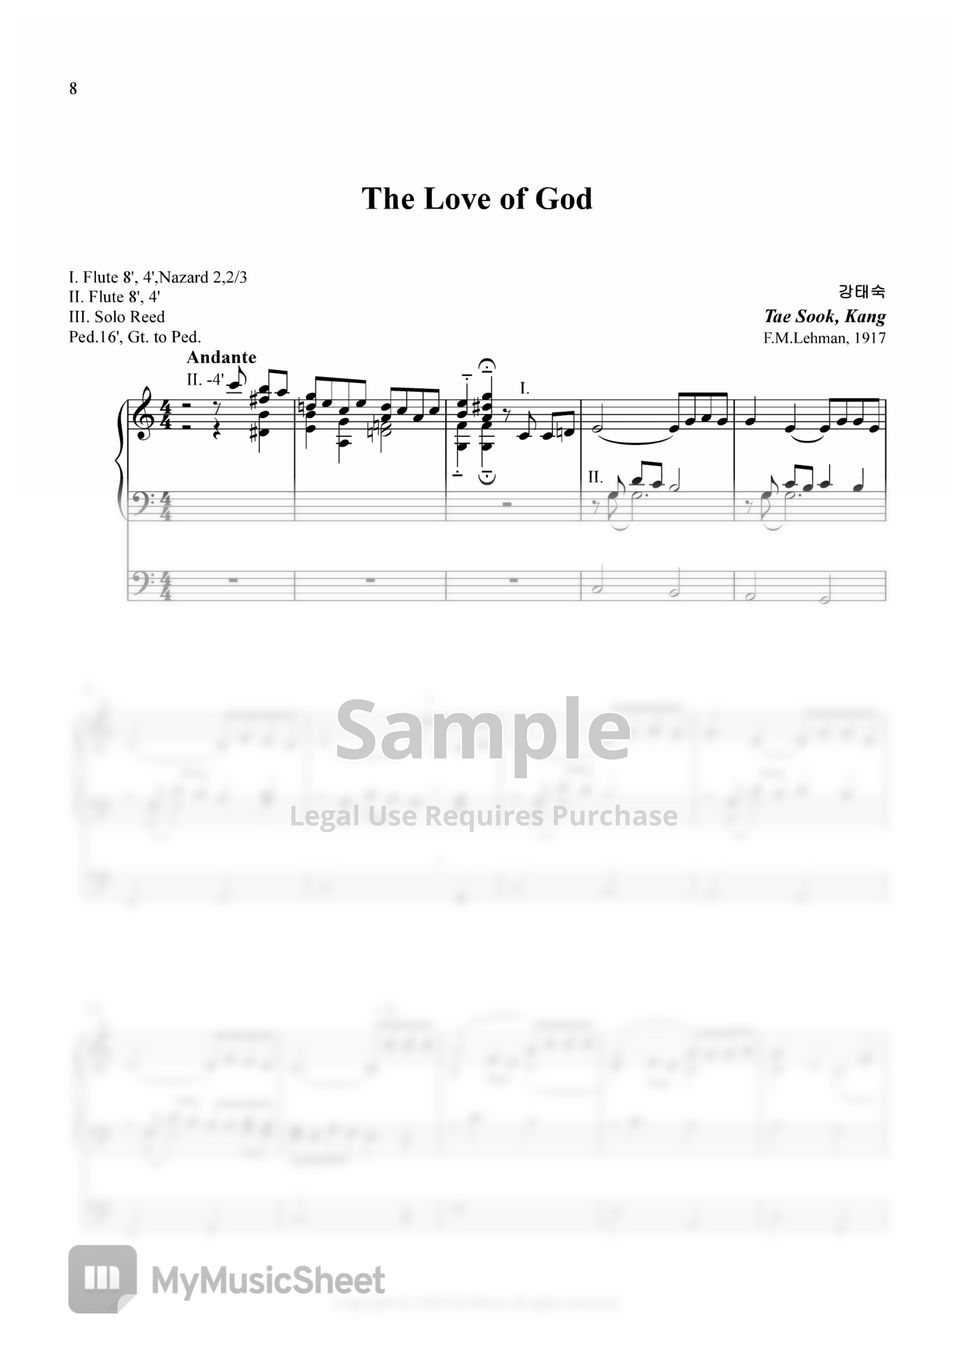 Frederick Martin Lehman - The love of God (organsolo) by TS-Kang